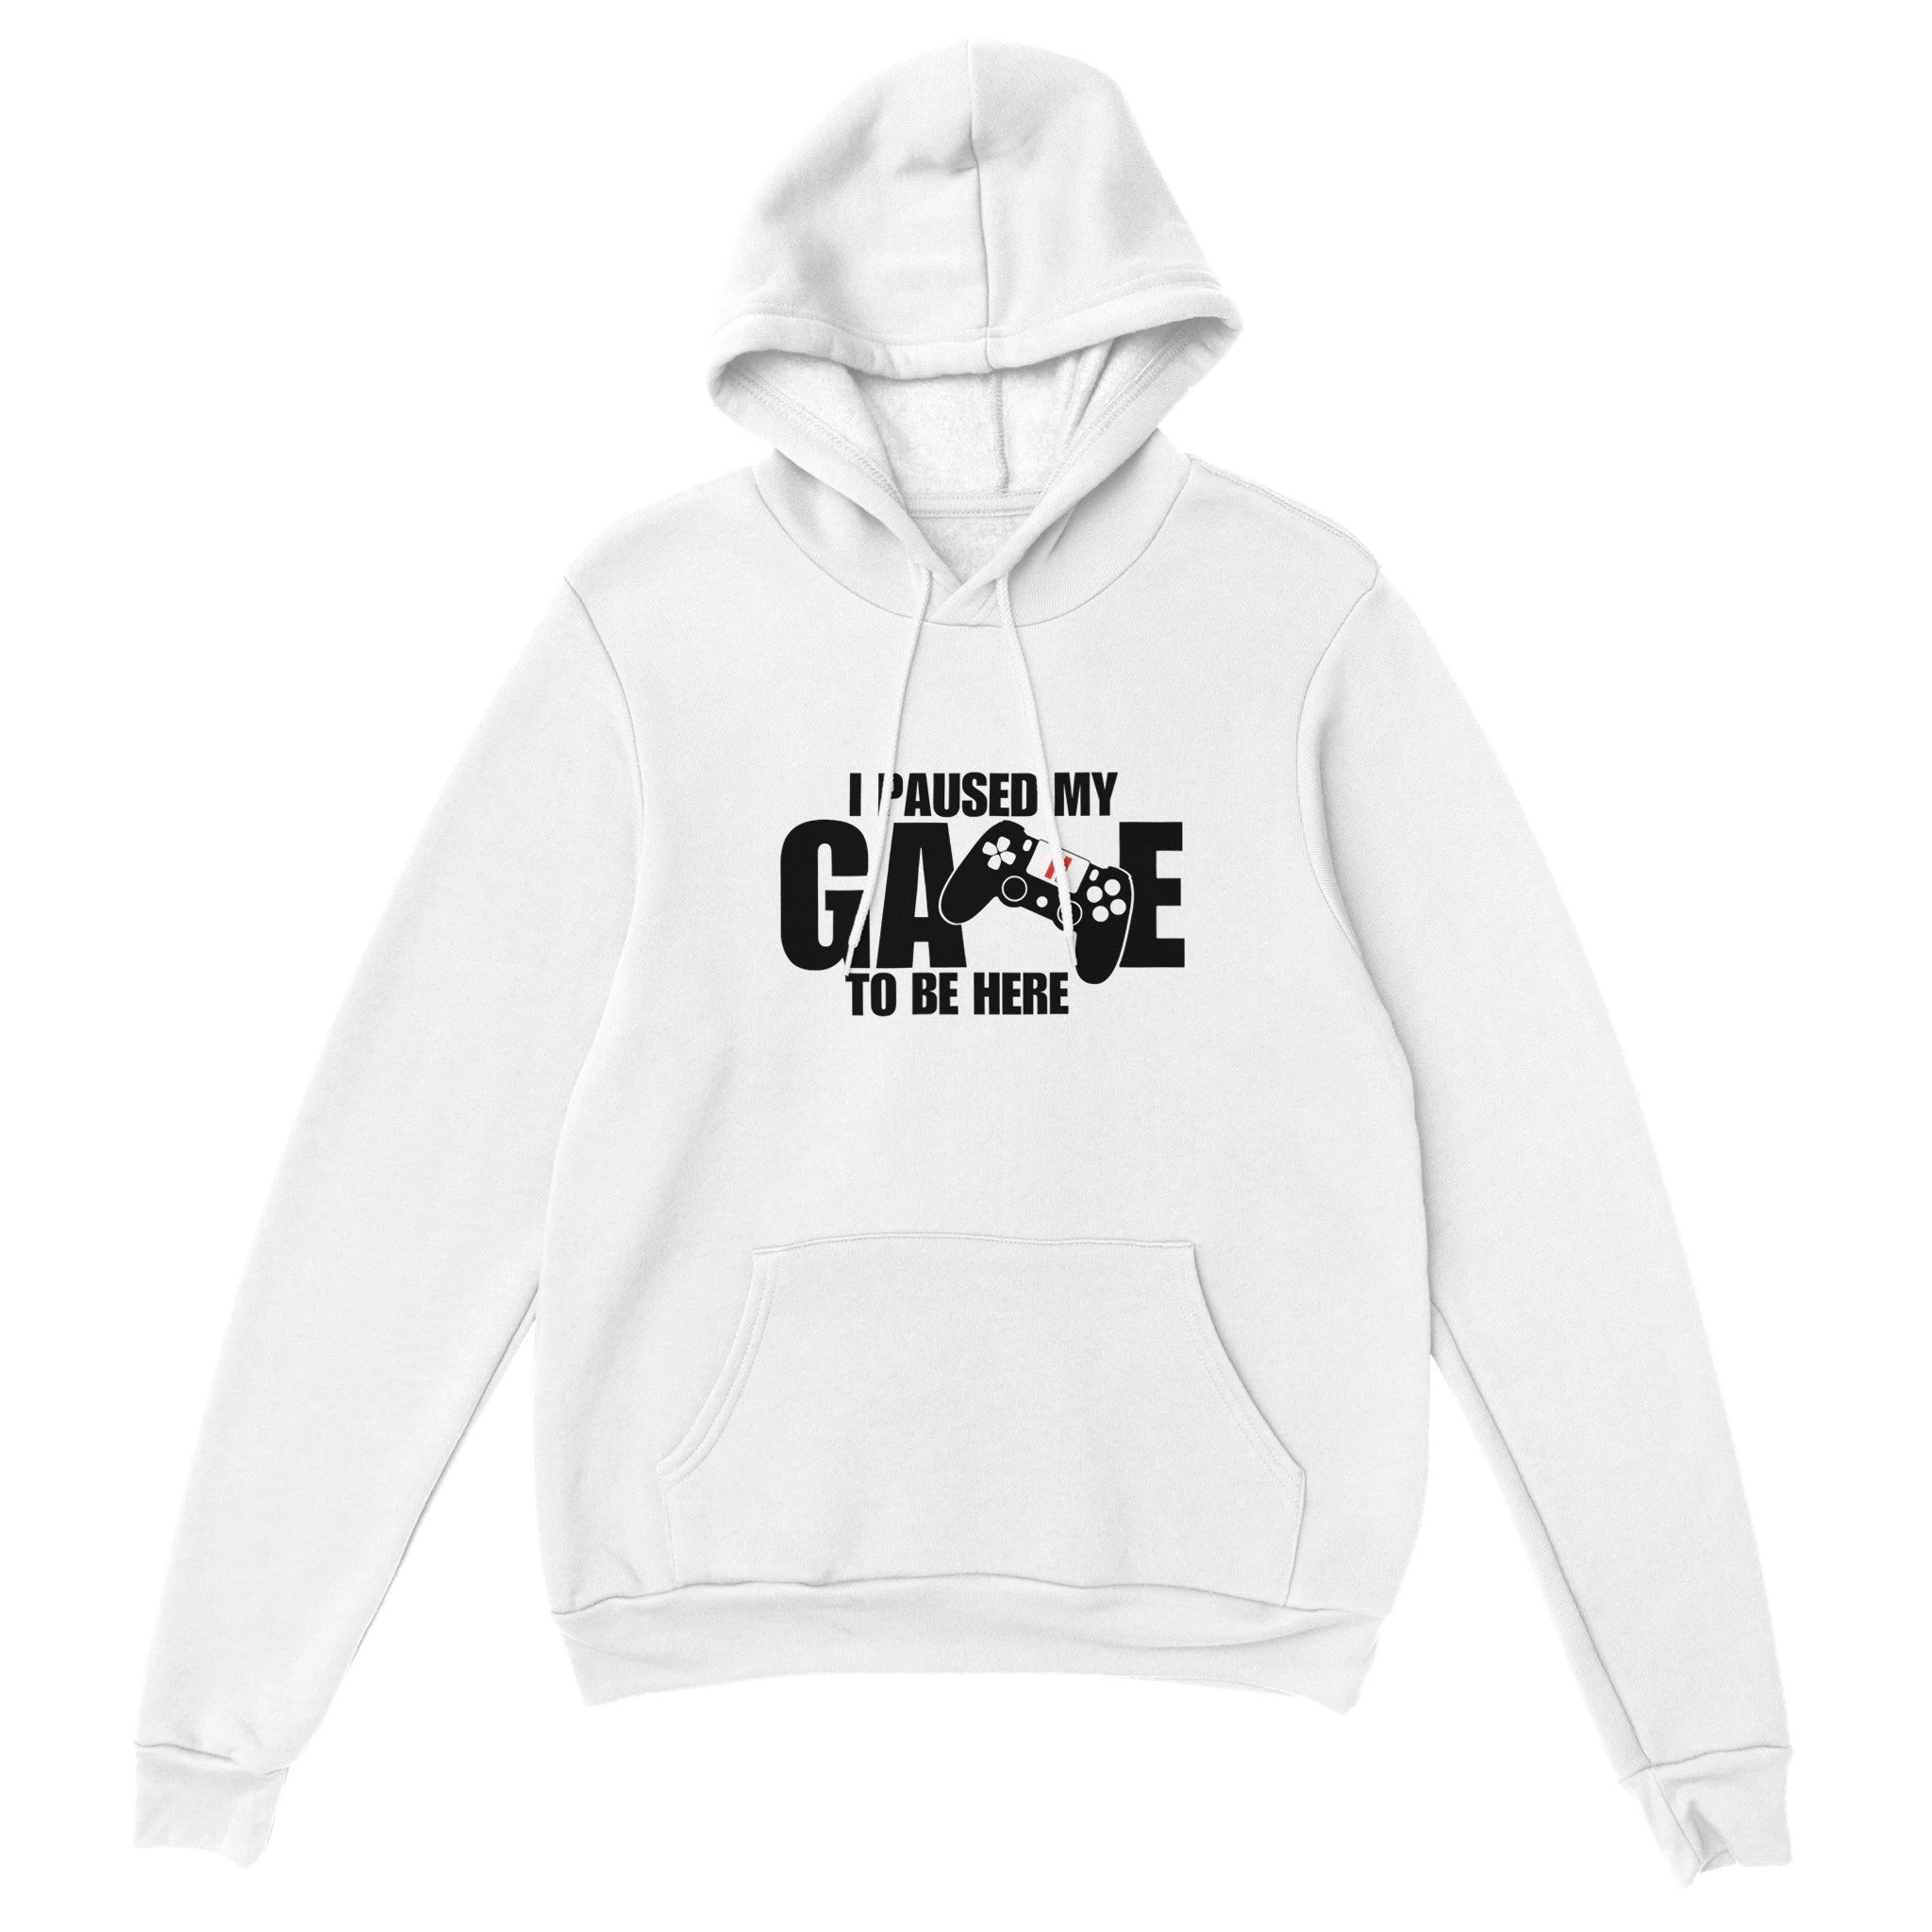 Unisex Pullover Hoodie I paused my Game to Be Here, Funny Shirt